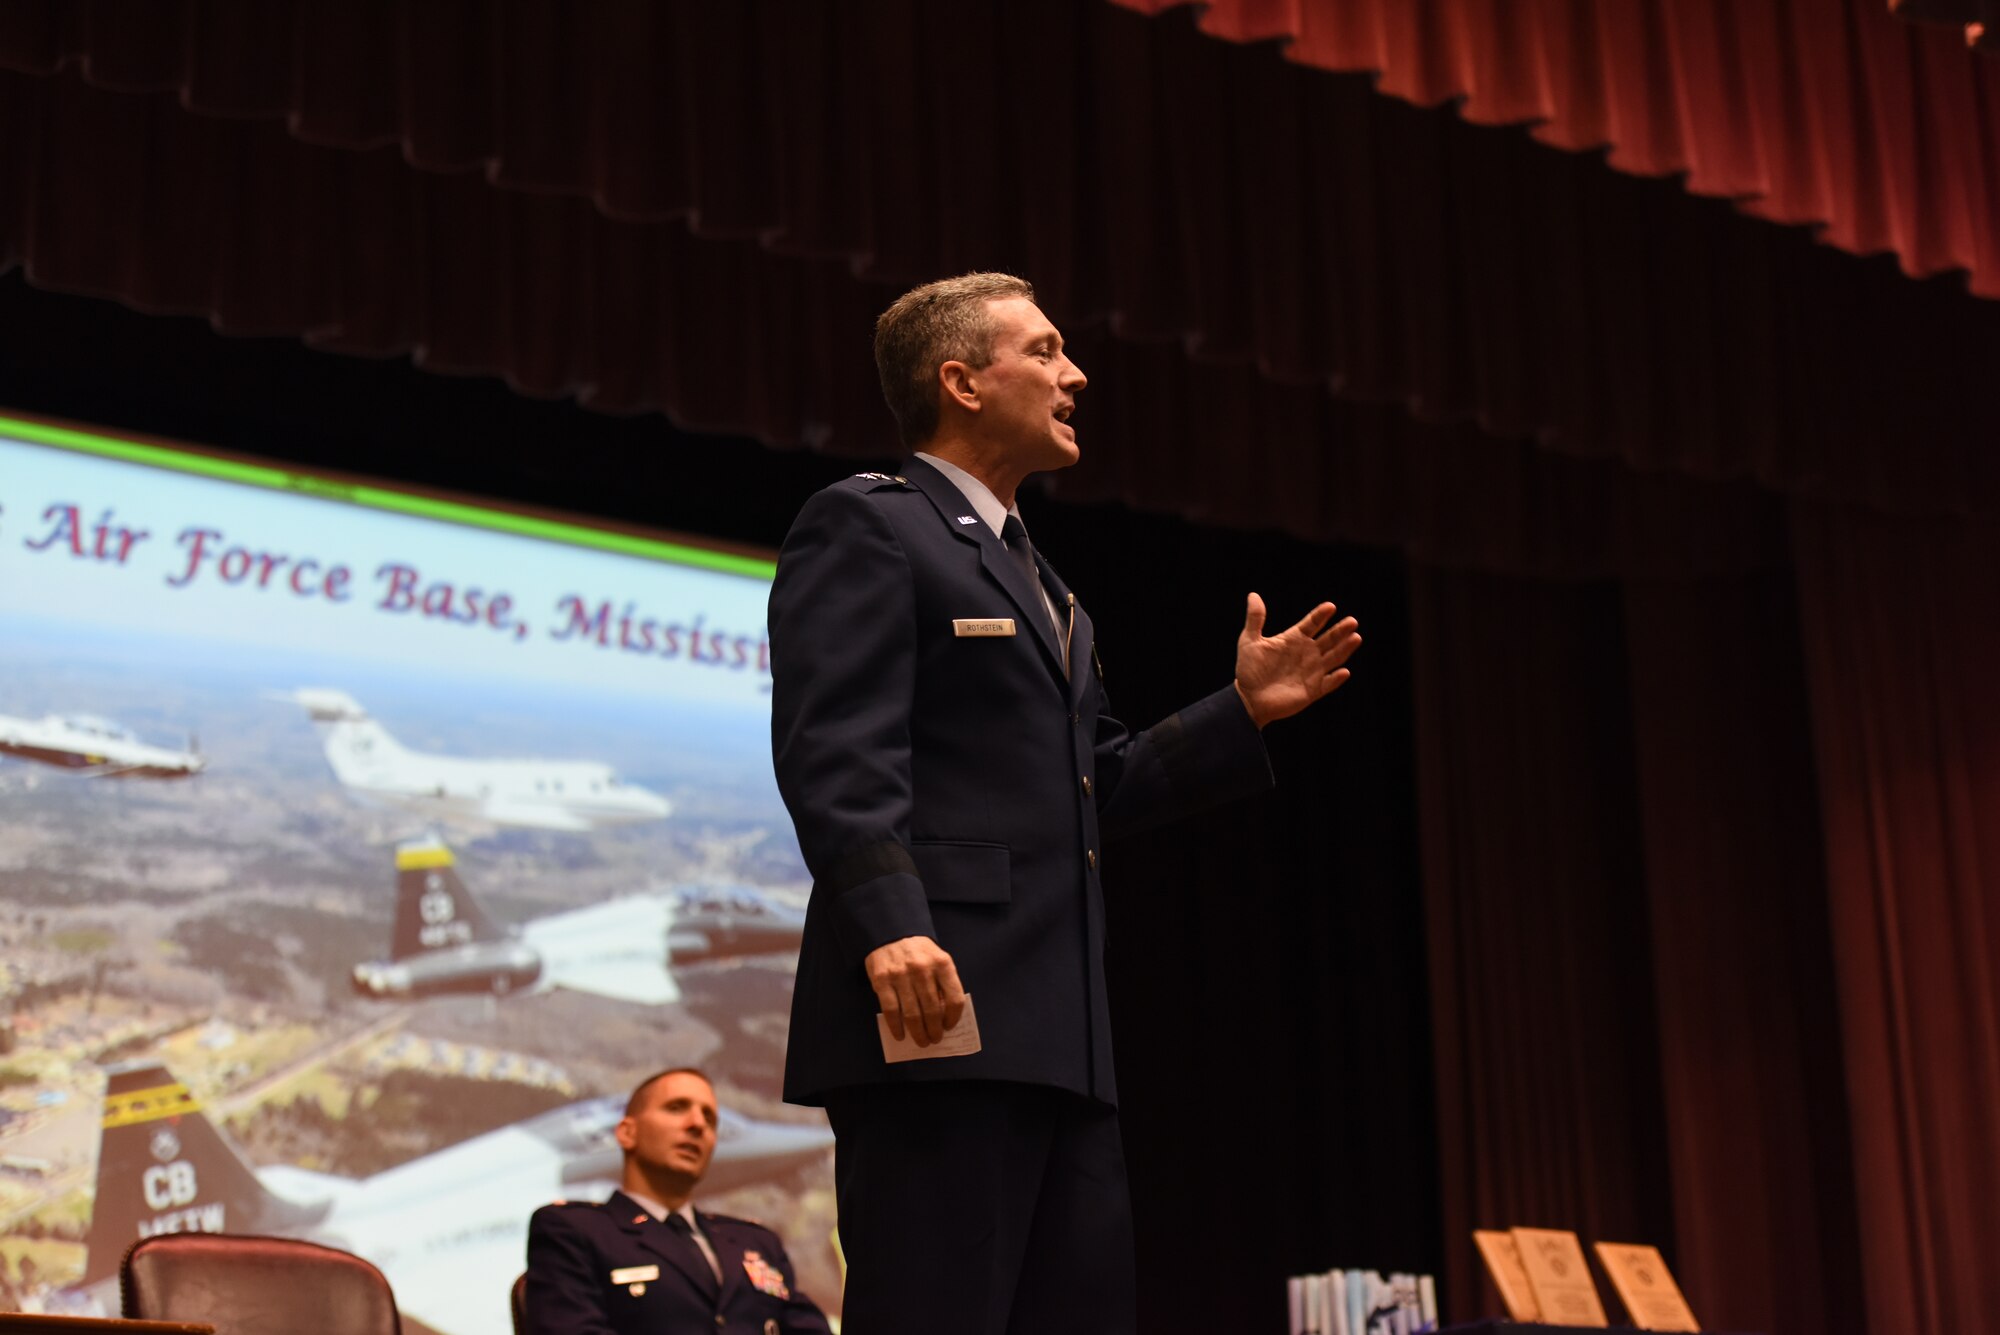 Maj. Gen. Michael D. Rothstein, commander of the Curtis E. LeMay Center and vice commander of Air University at Maxwell Air Force Base, Alabama, speaks at Specialized Undergraduate Pilot Training Classes 18-14/15’s graduation Sept. 7, 2018, on Columbus Air Force Base, Mississippi. In his speech, Rothstein shared his favorite things about being an Air Force pilot. (U.S. Air Force photo by Airman 1st Class Beaux Hebert)